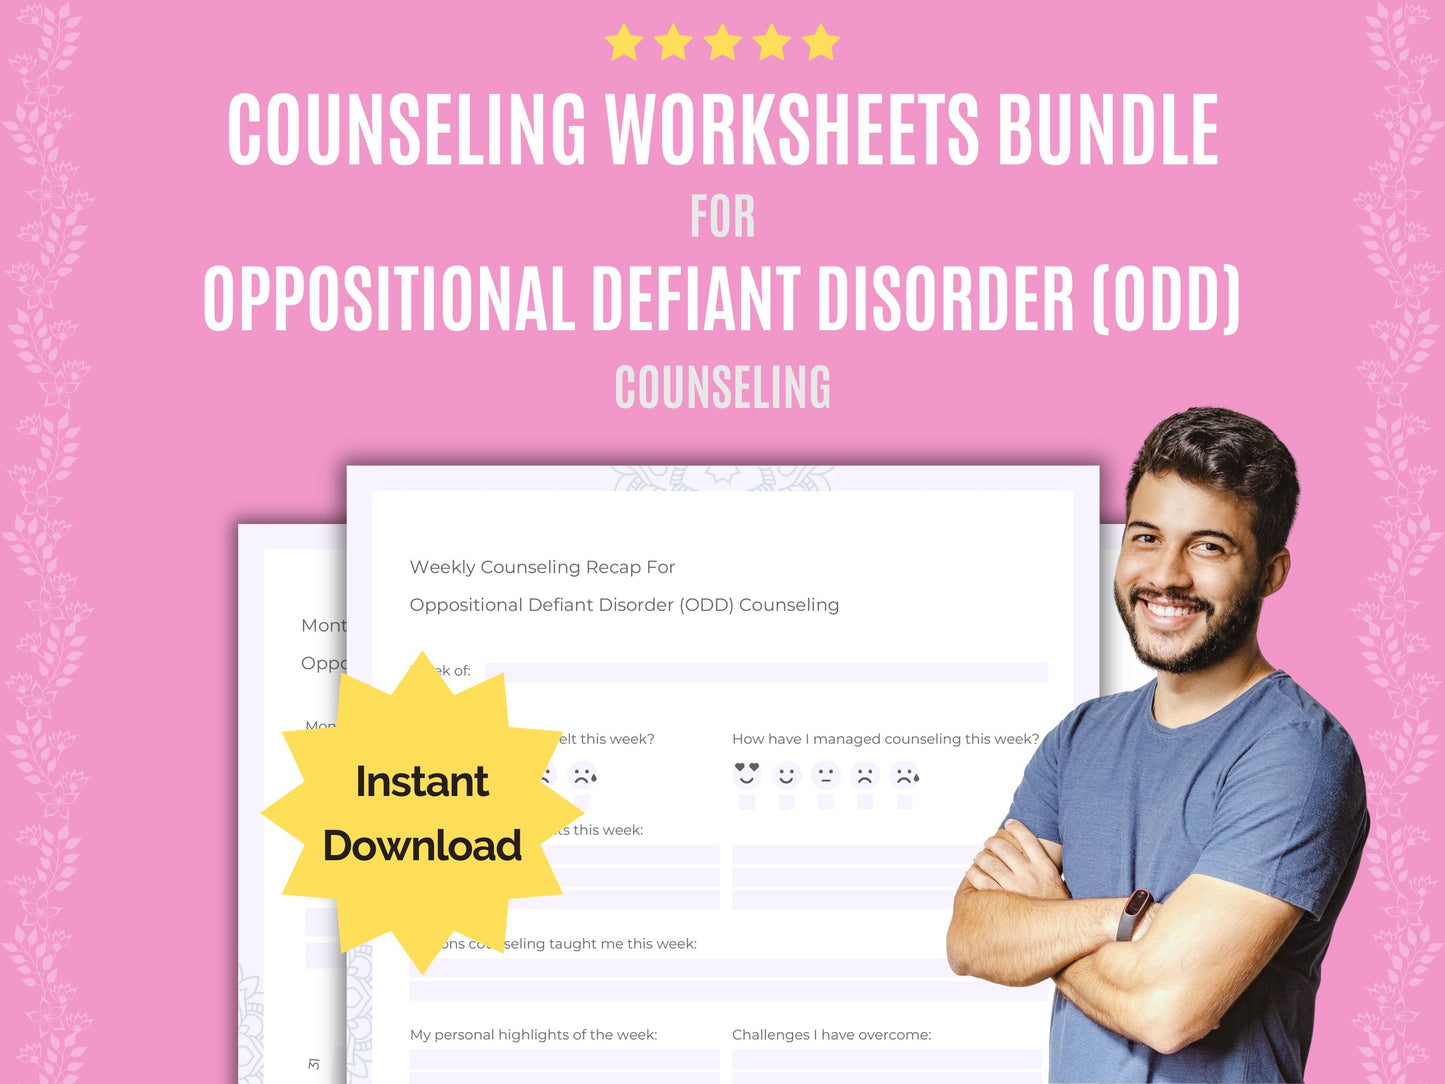 Oppositional Defiant Disorder (ODD) Counseling Workbook